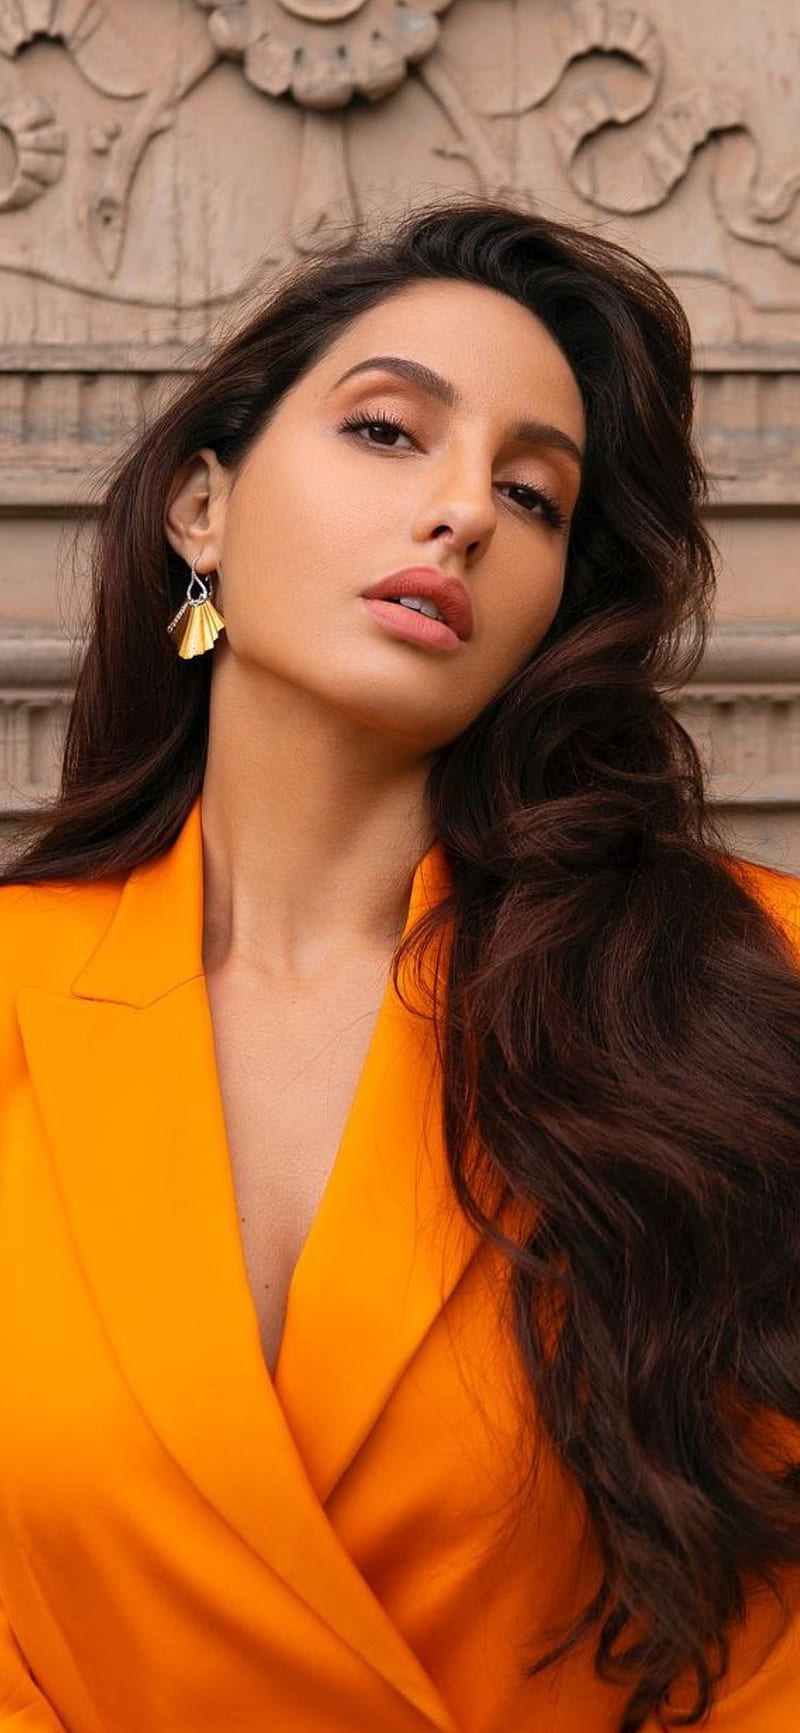 An Amazing Collection of Nora Fatehi’s HD Images – Over 999+ Pictures in Full 4K Quality